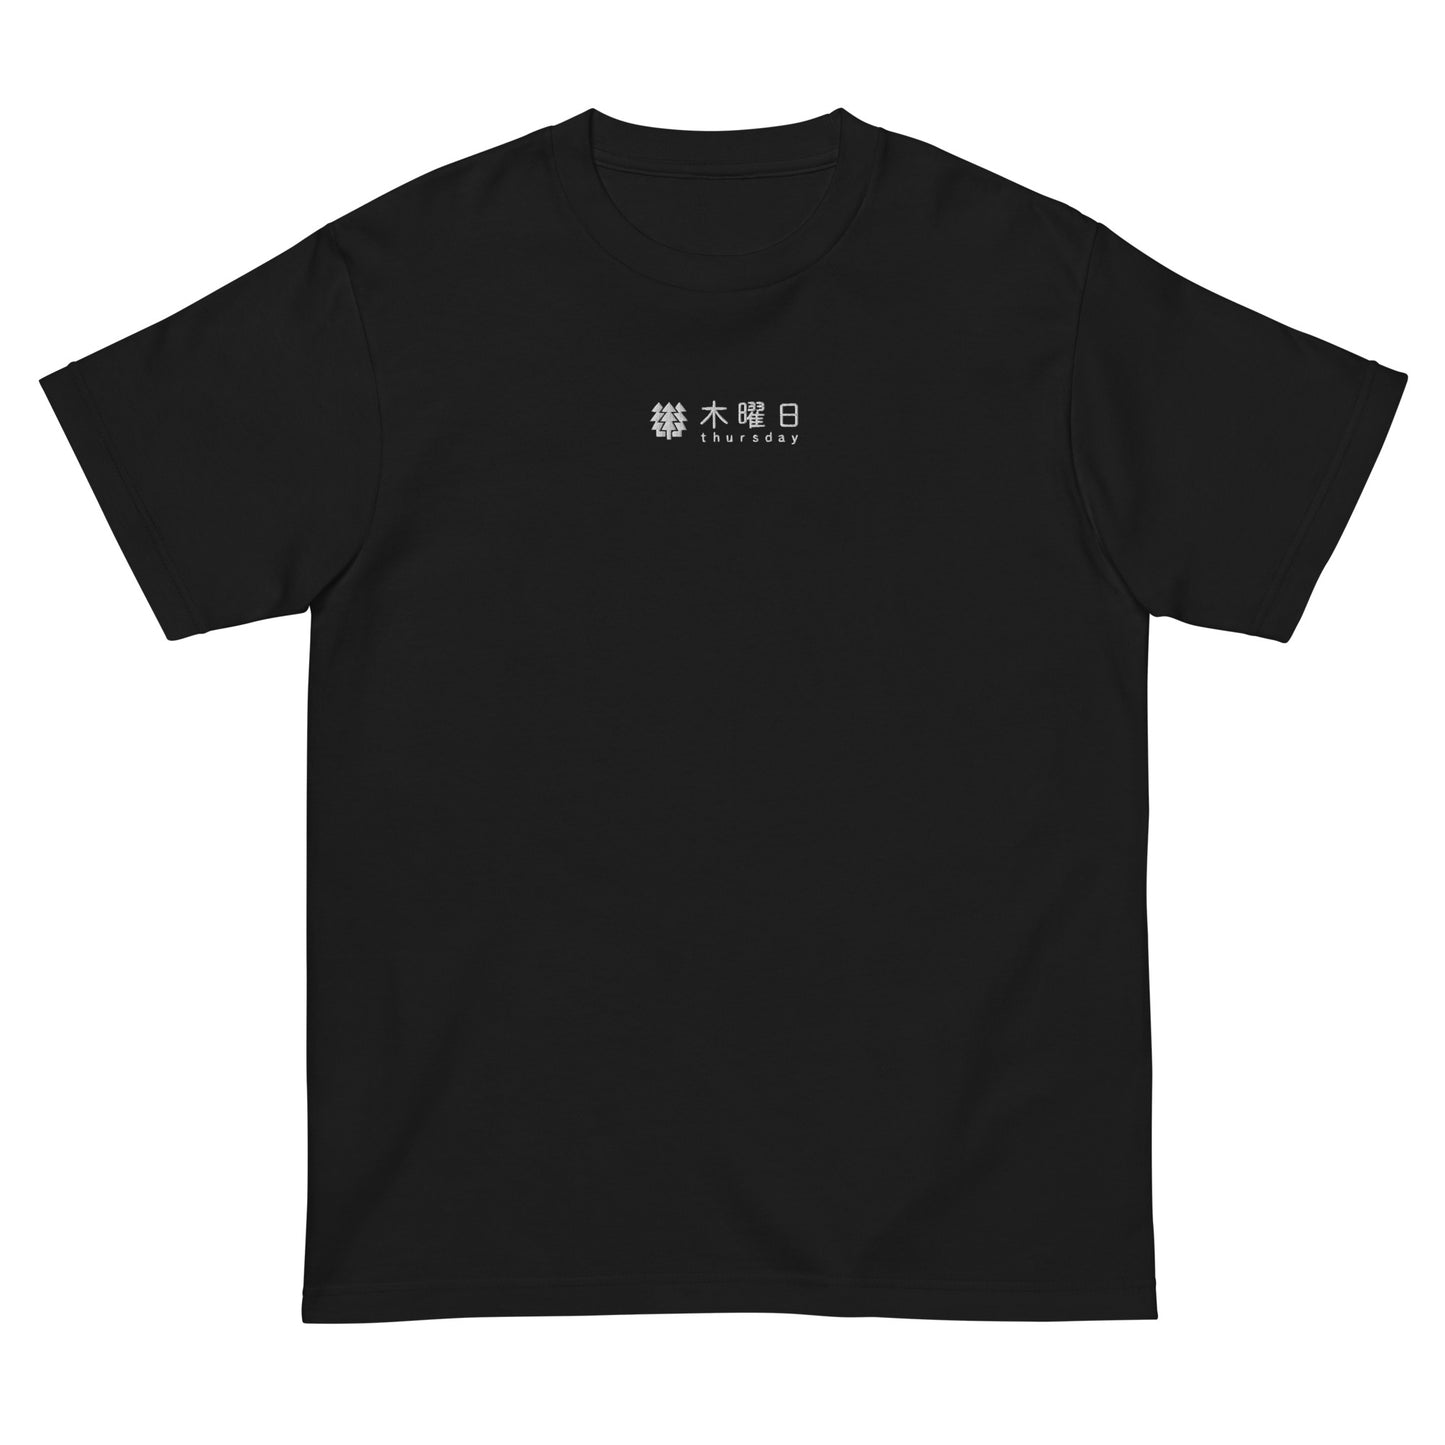 Black High Quality Tee - Front Design with an White Embroidery "Thursday" in Japanese and English